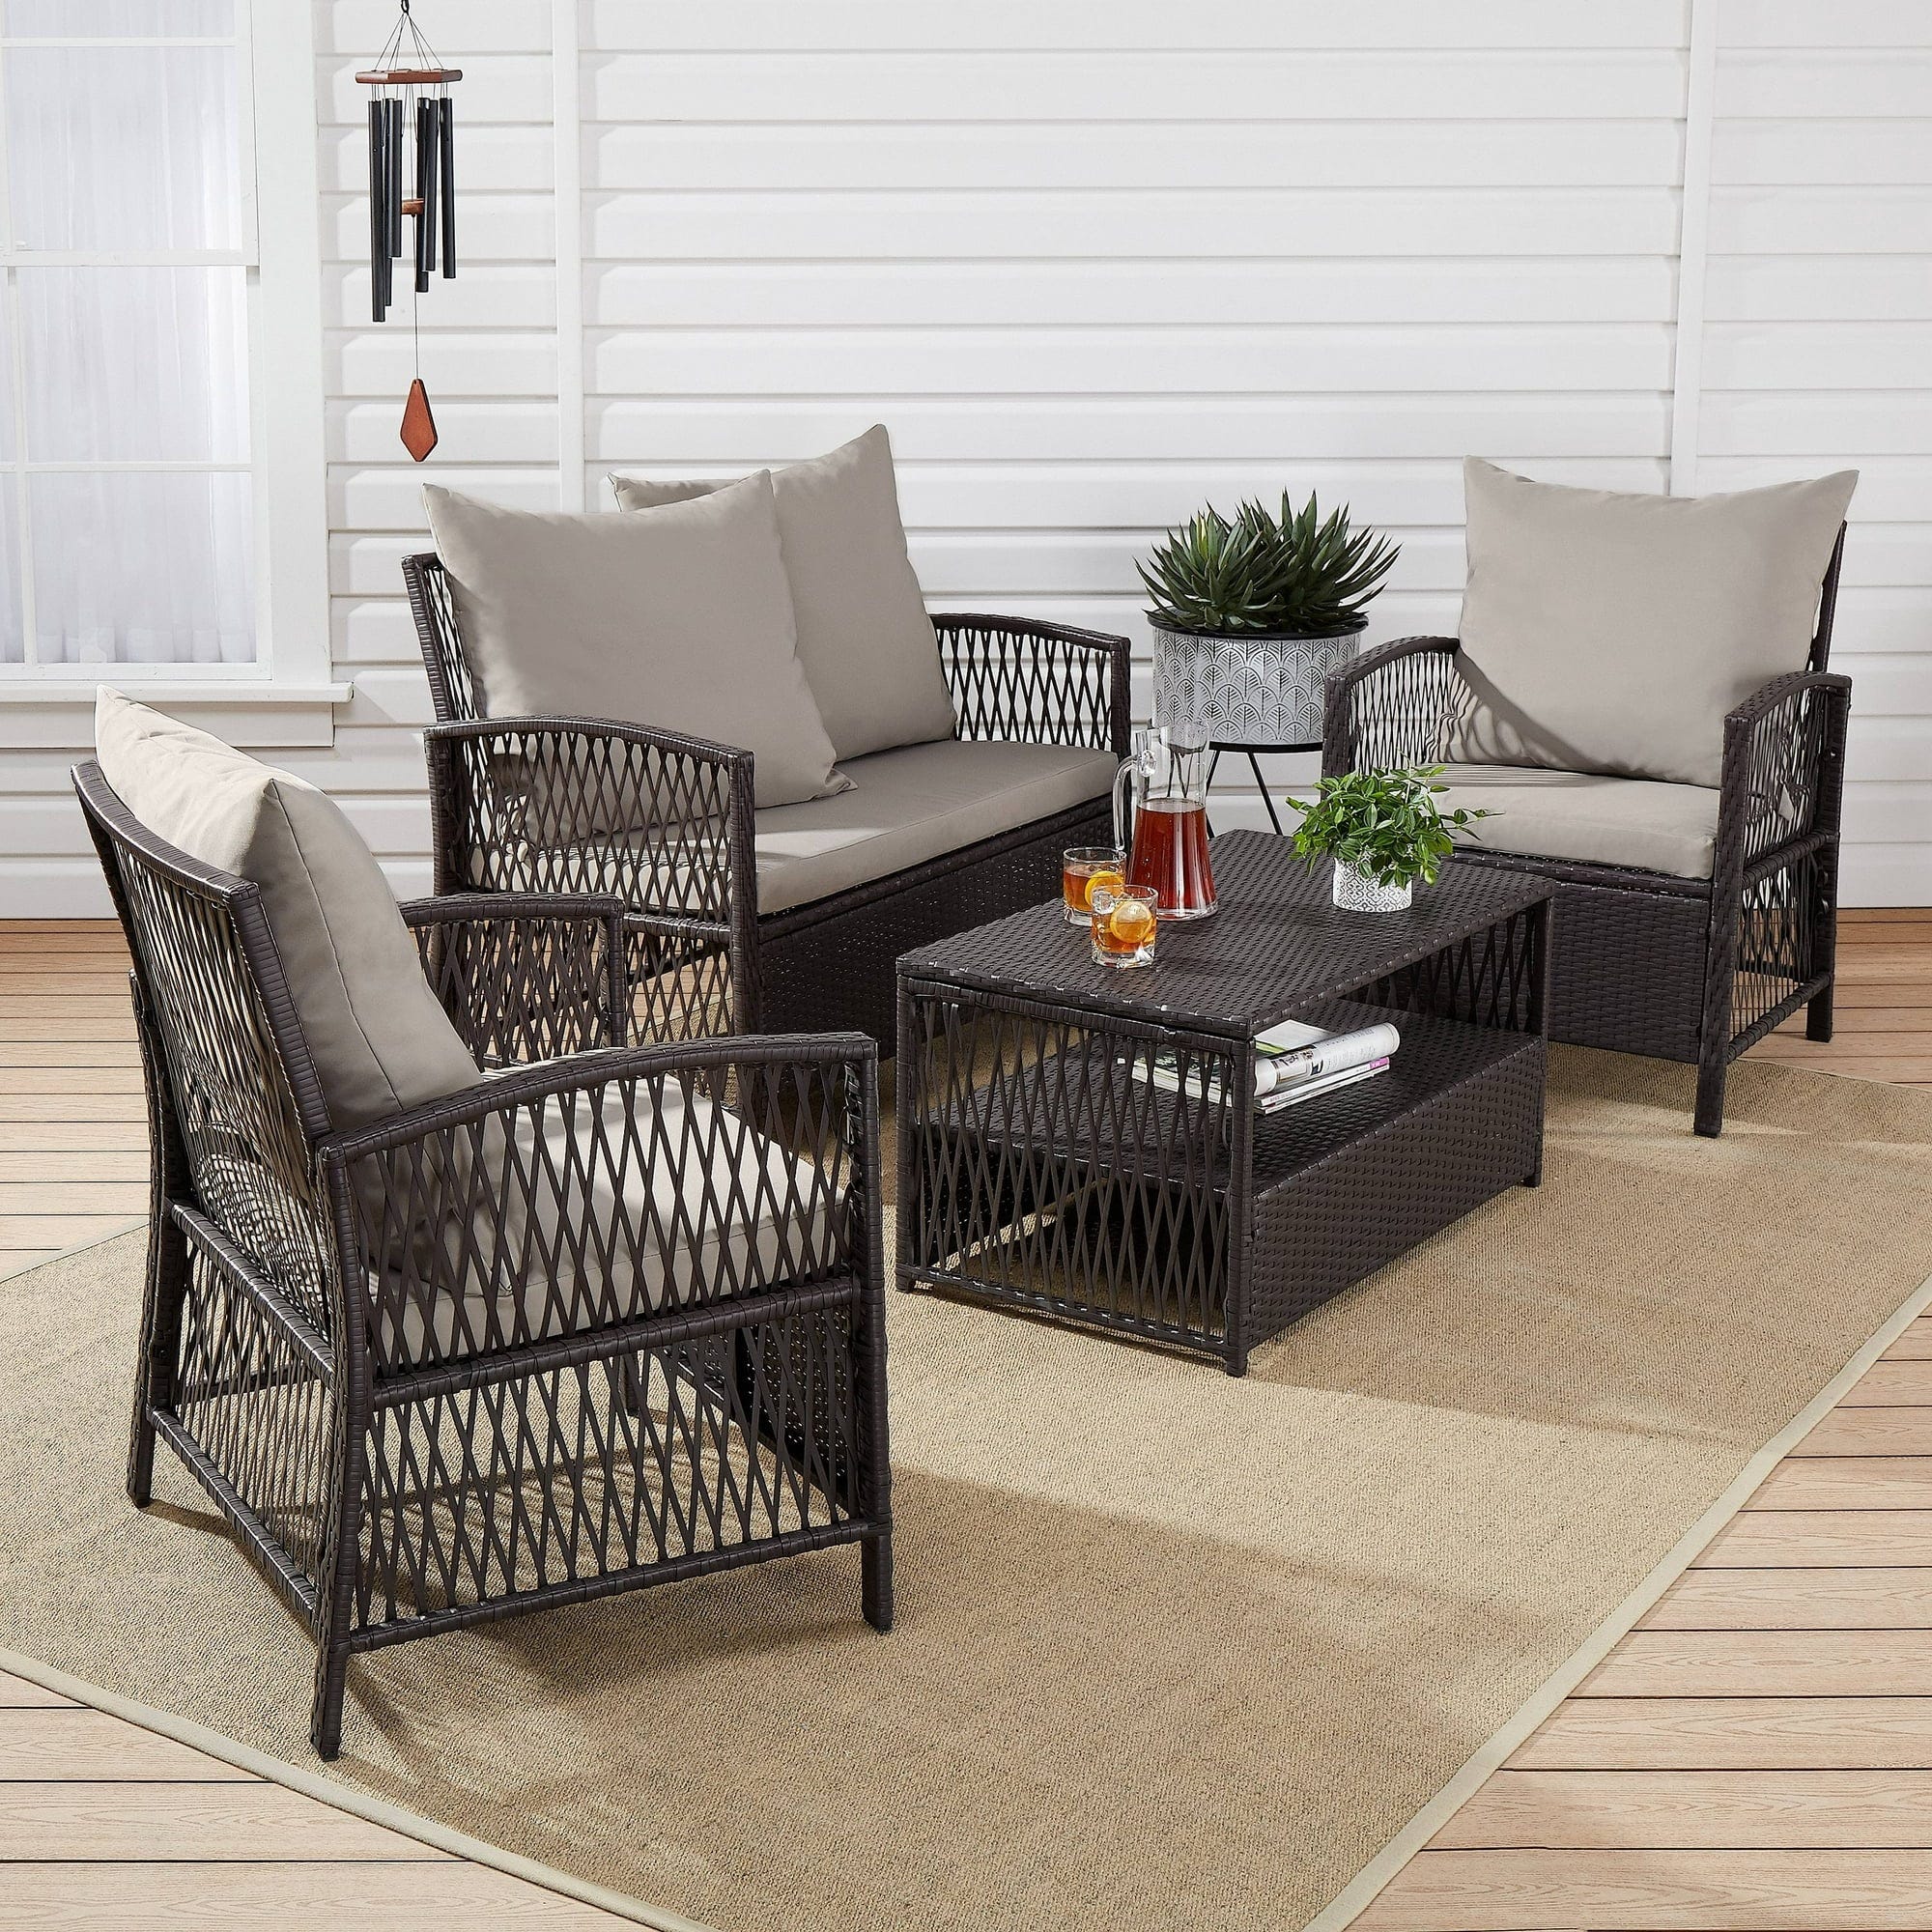 A patio furniture set with two chairs, a loveseat, and a coffee table, all in dark wicker with beige cushions.